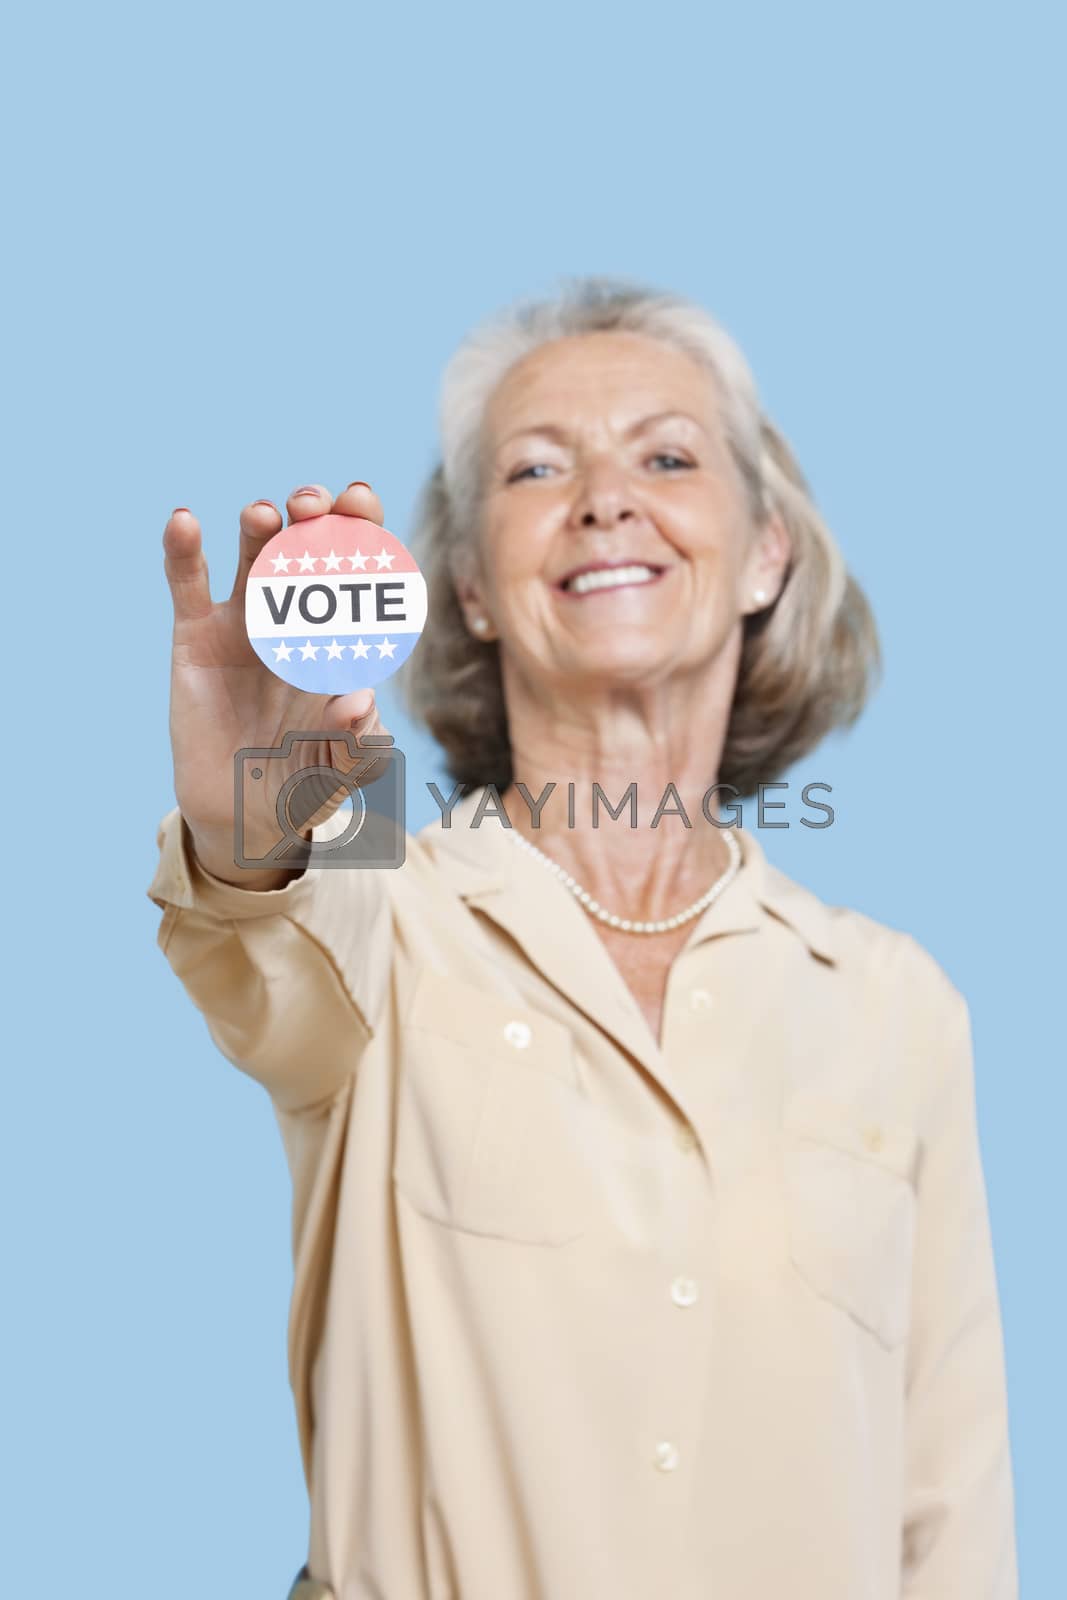 Royalty free image of Portrait of senior woman holding an election badge against blue background by moodboard